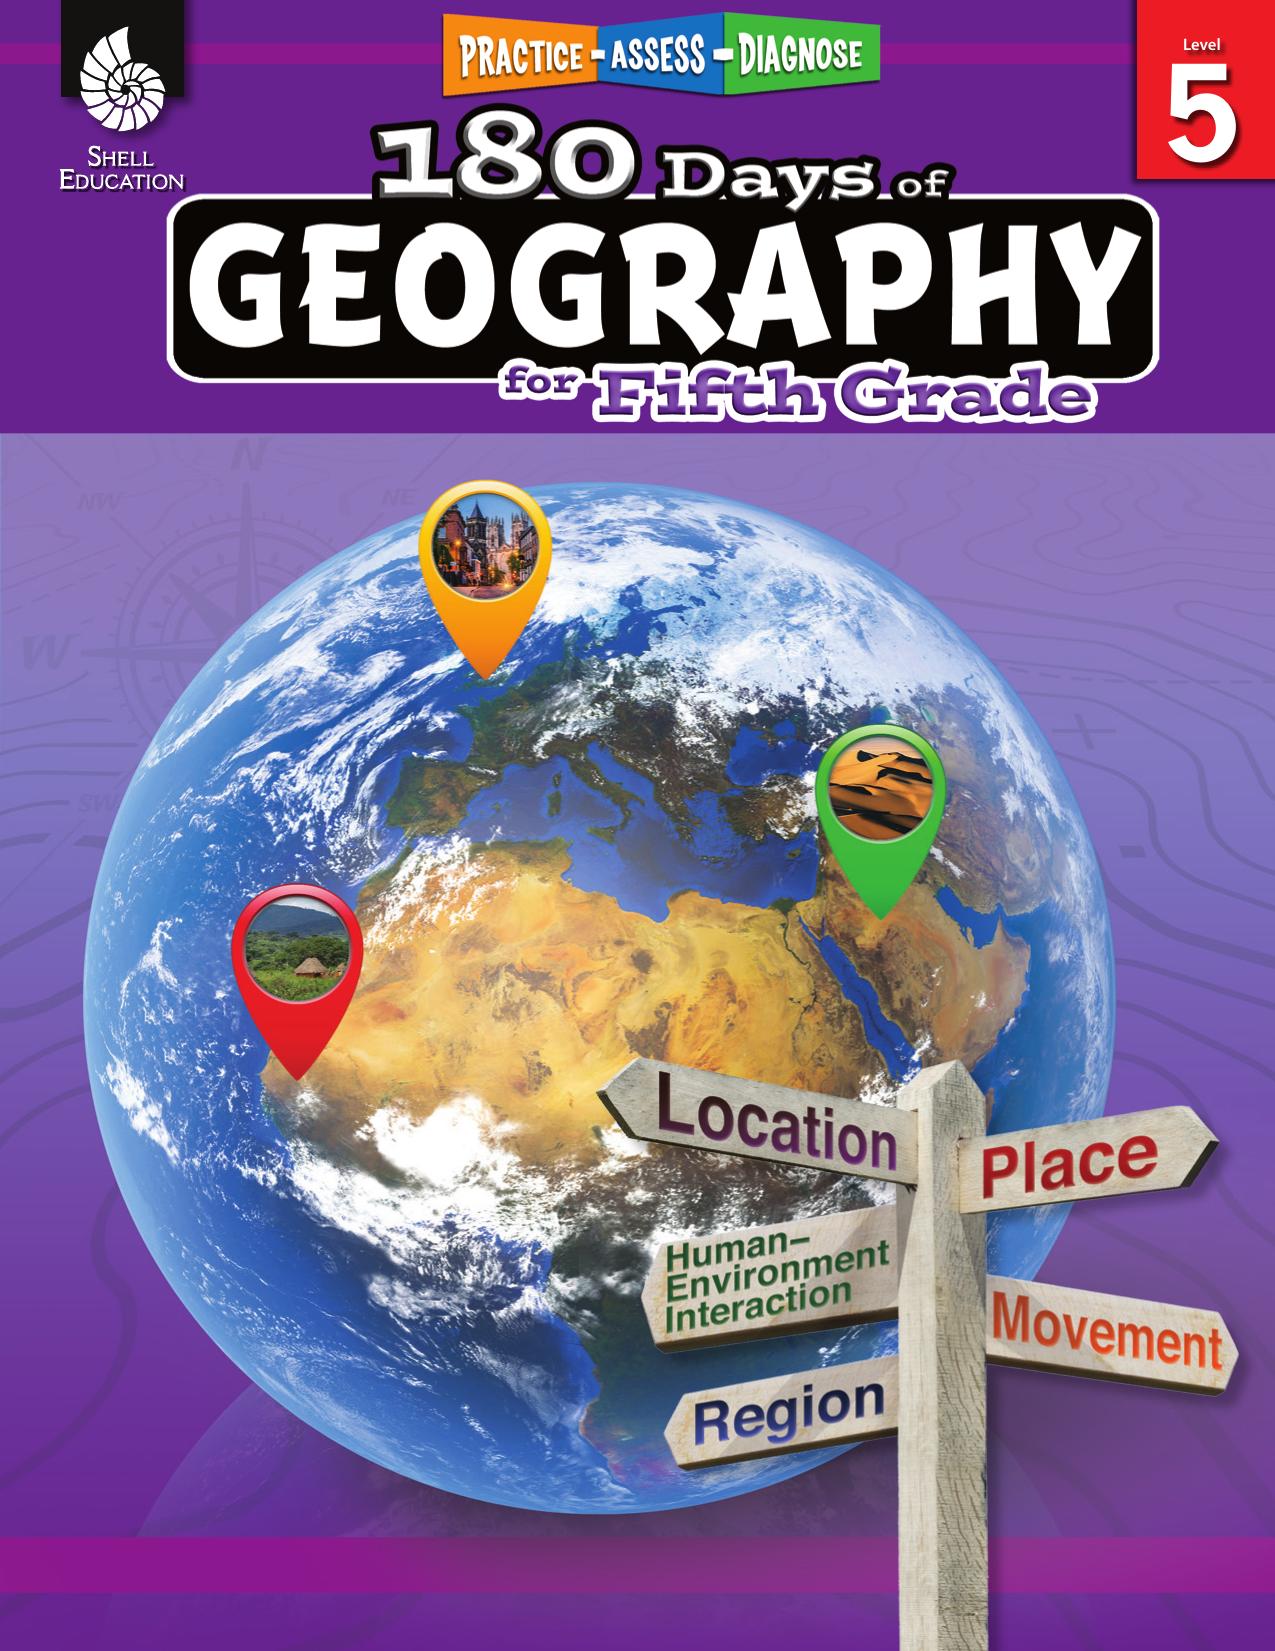 180 Days of Geography for Fifth Grade: Practice, Assess, Diagnose by Kristin Kemp